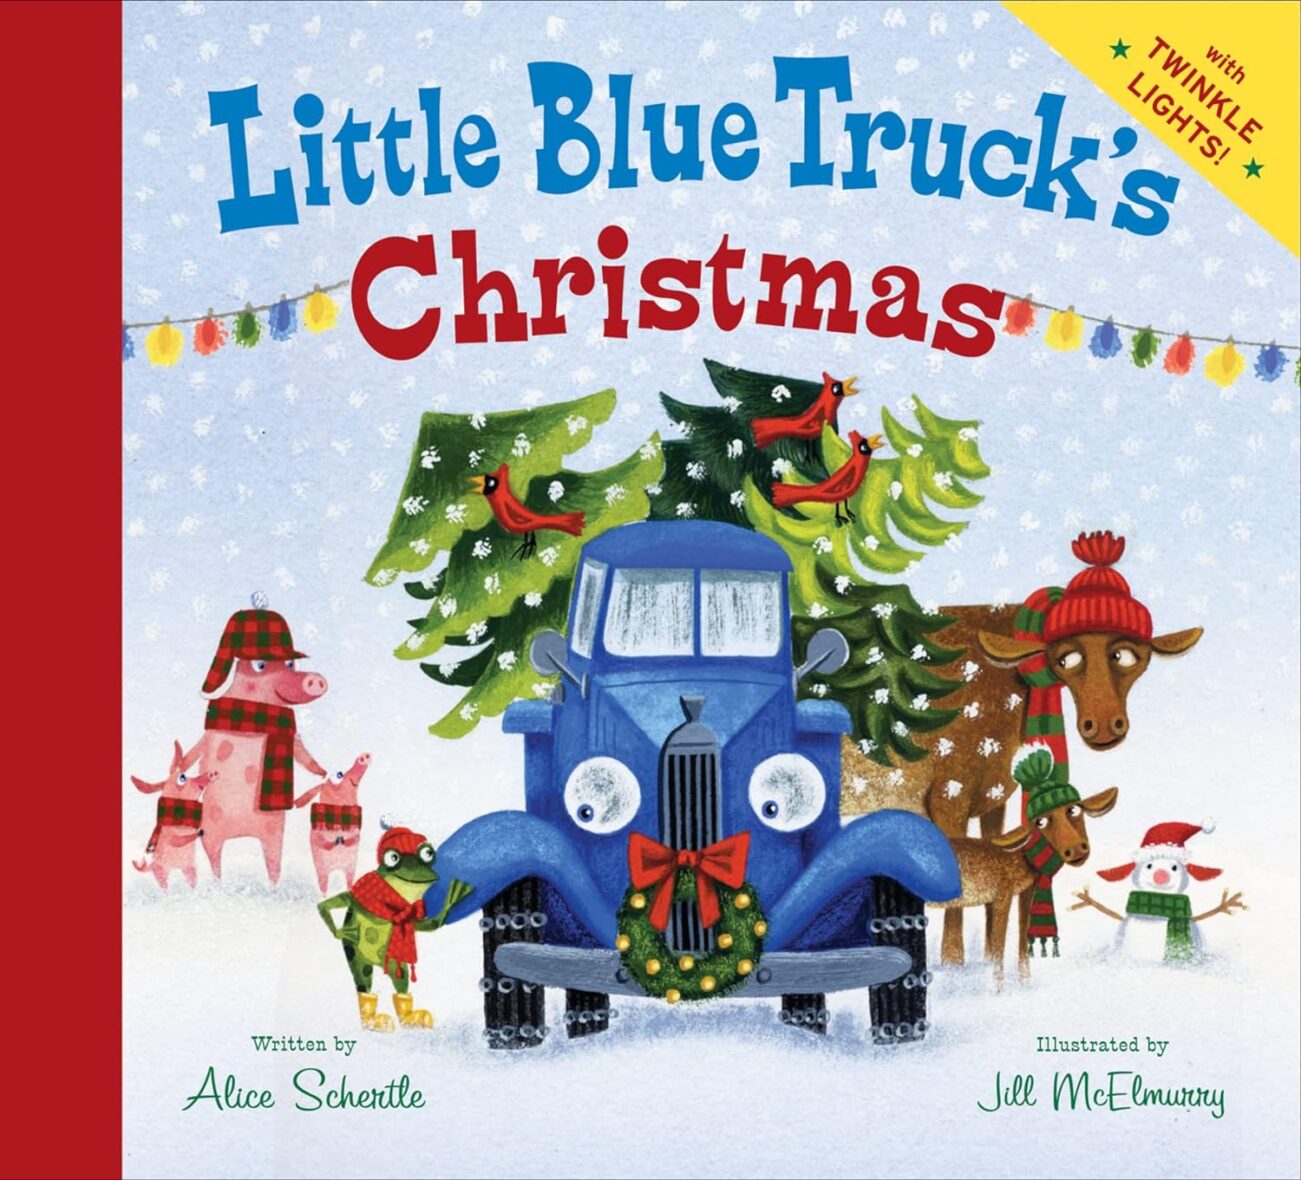 Little Blue Truck’s Christmas: A Christmas Holiday Book for Kids Board book